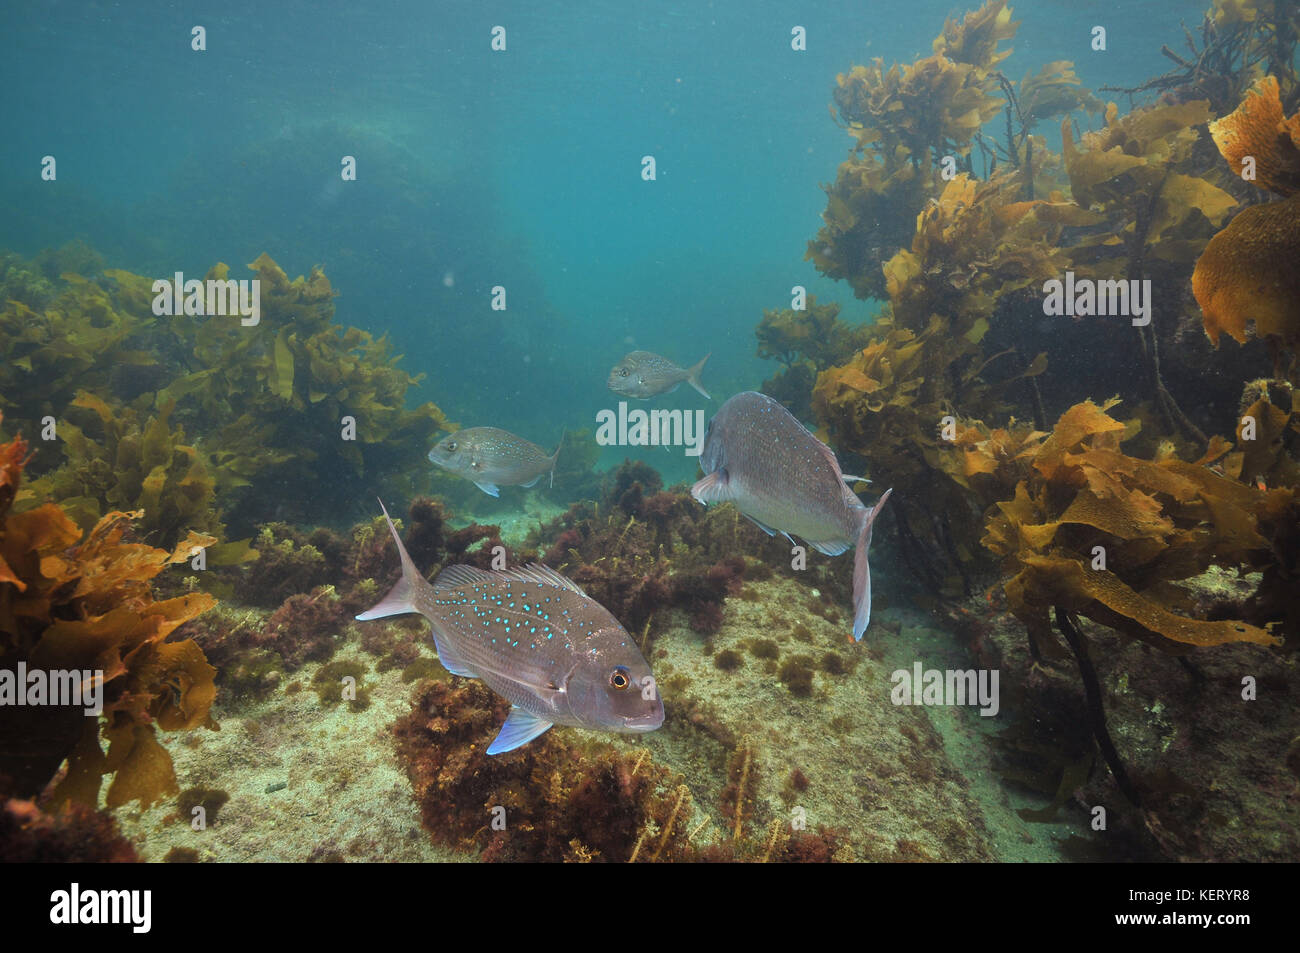 Australasian snappers Pagrus auratus among brown sea weeds of temperate Pacific ocean. Stock Photo